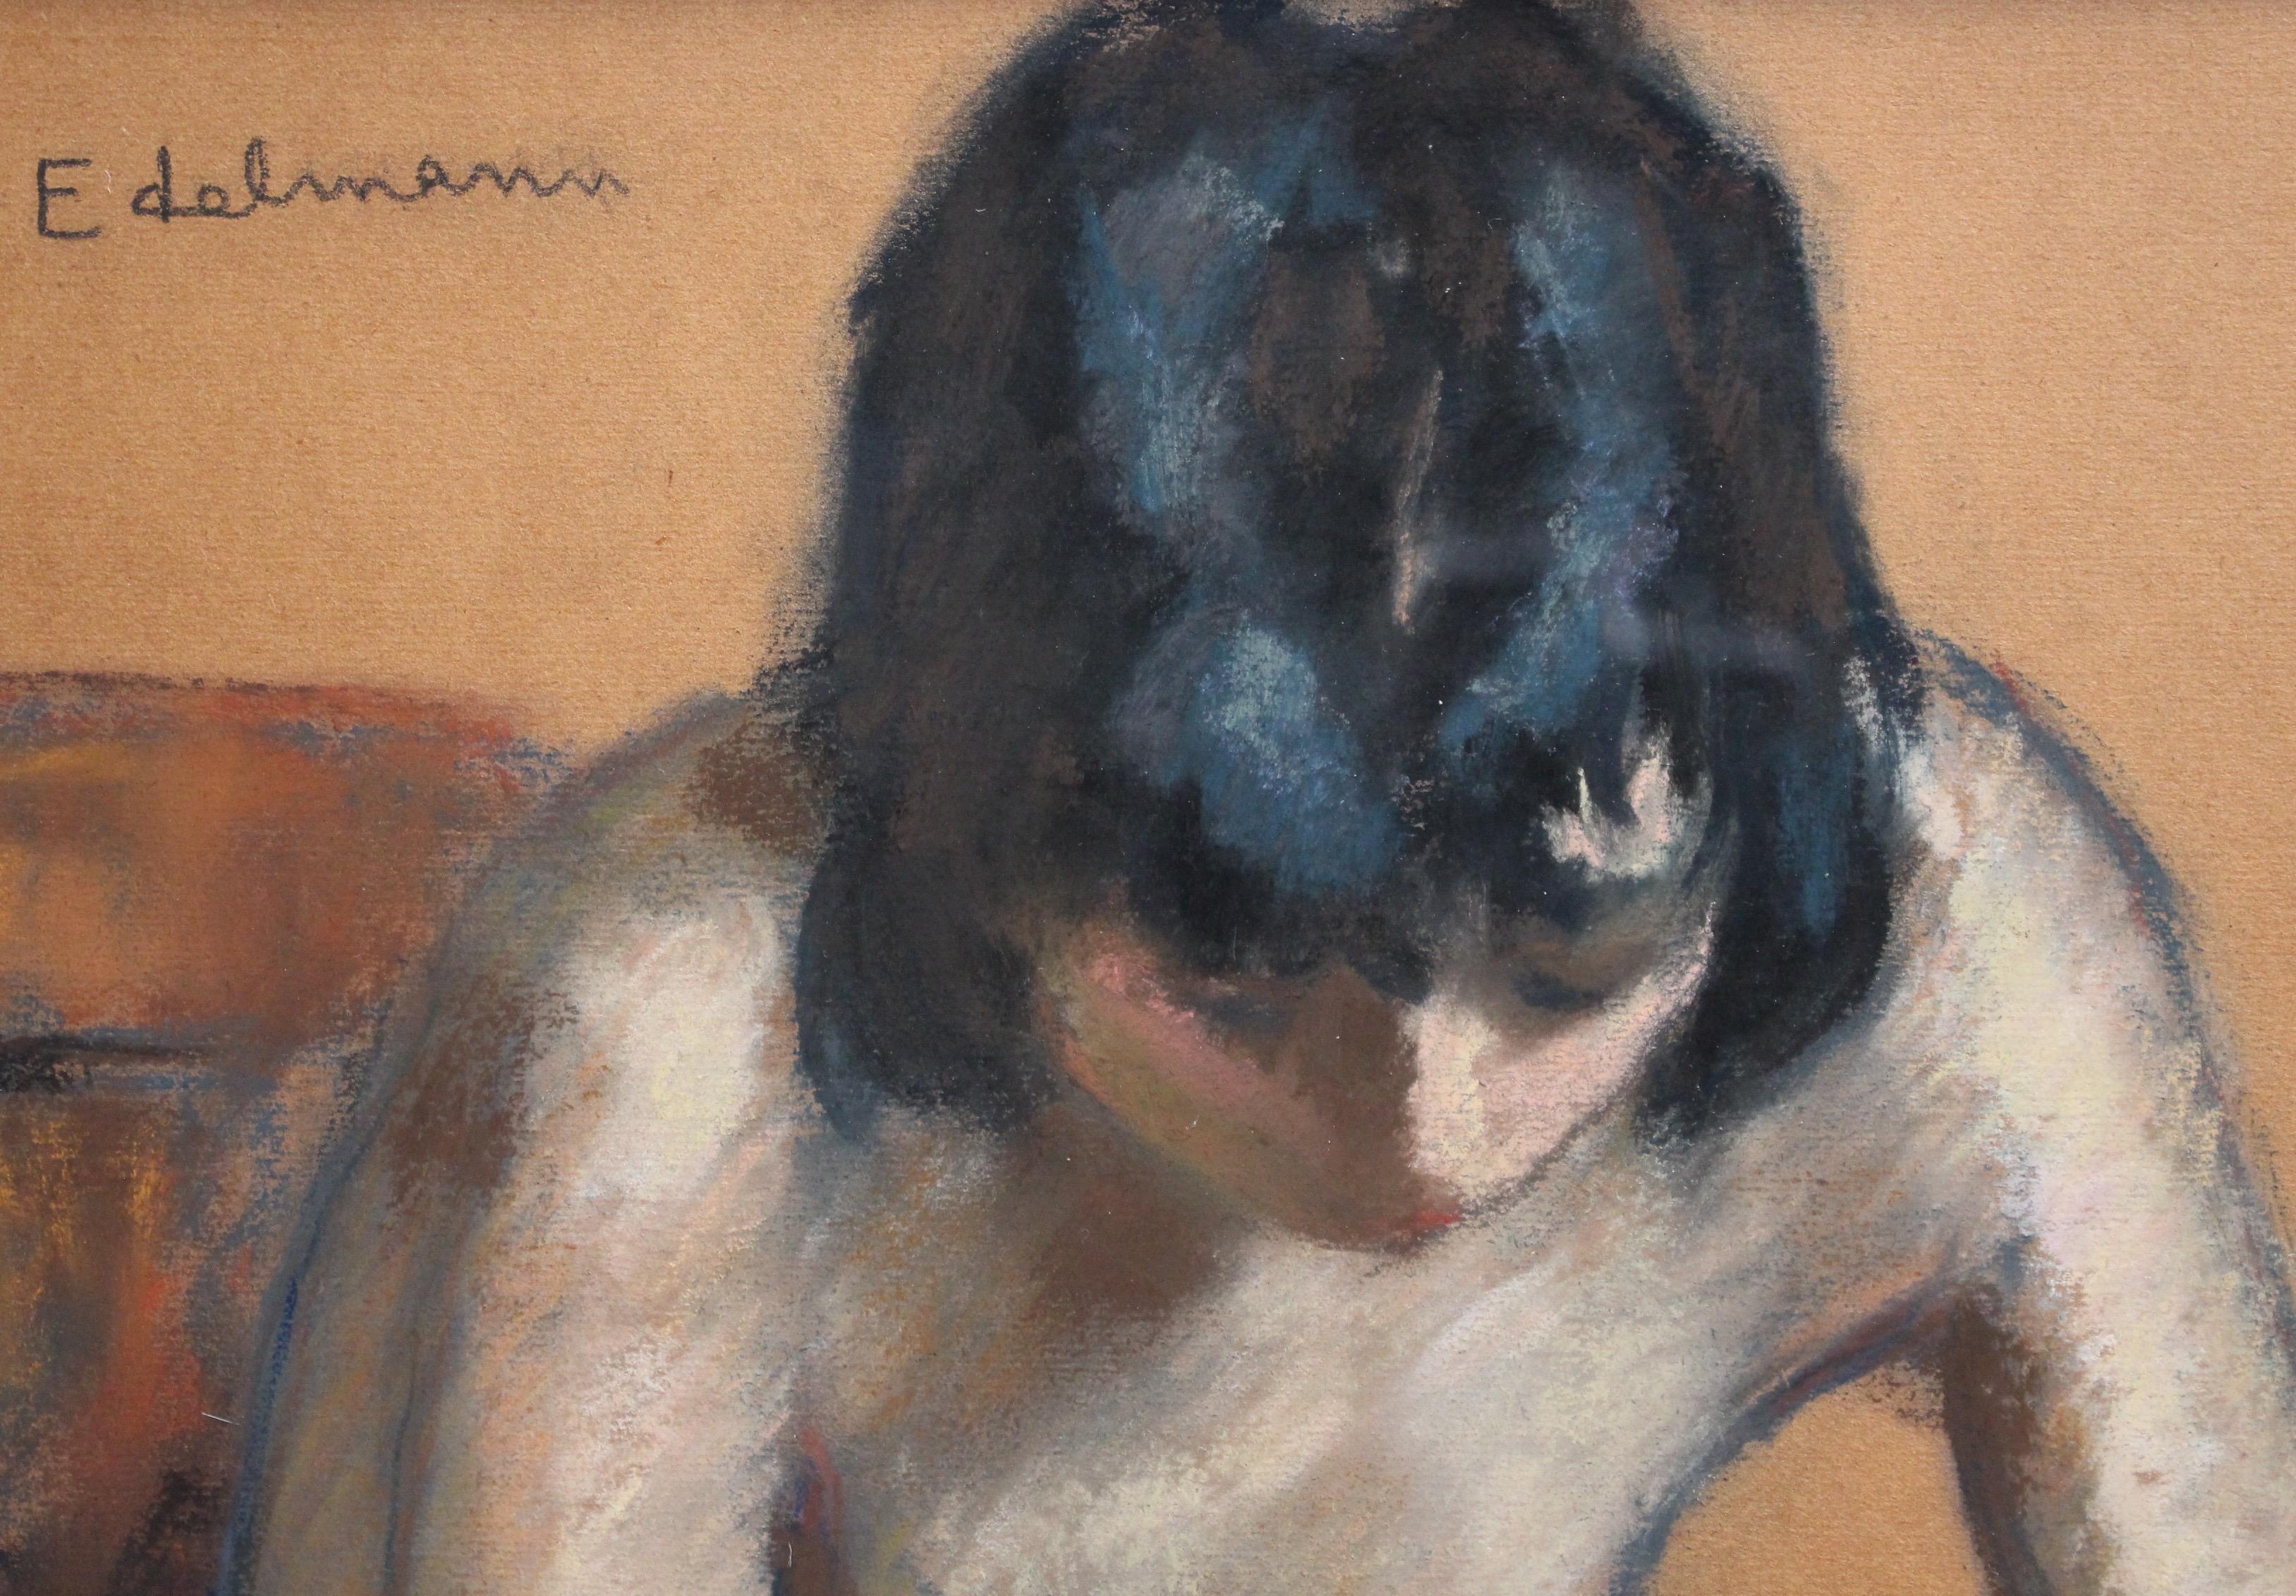 'Modern Urban Woman in Nude', pastel on coloured fine art paper, (circa 1930s), by Charles Auguste Edelmann (1879 - 1950). The quality of this work and skill of the artist is unquestionable. The painting depicts a woman having just returned home